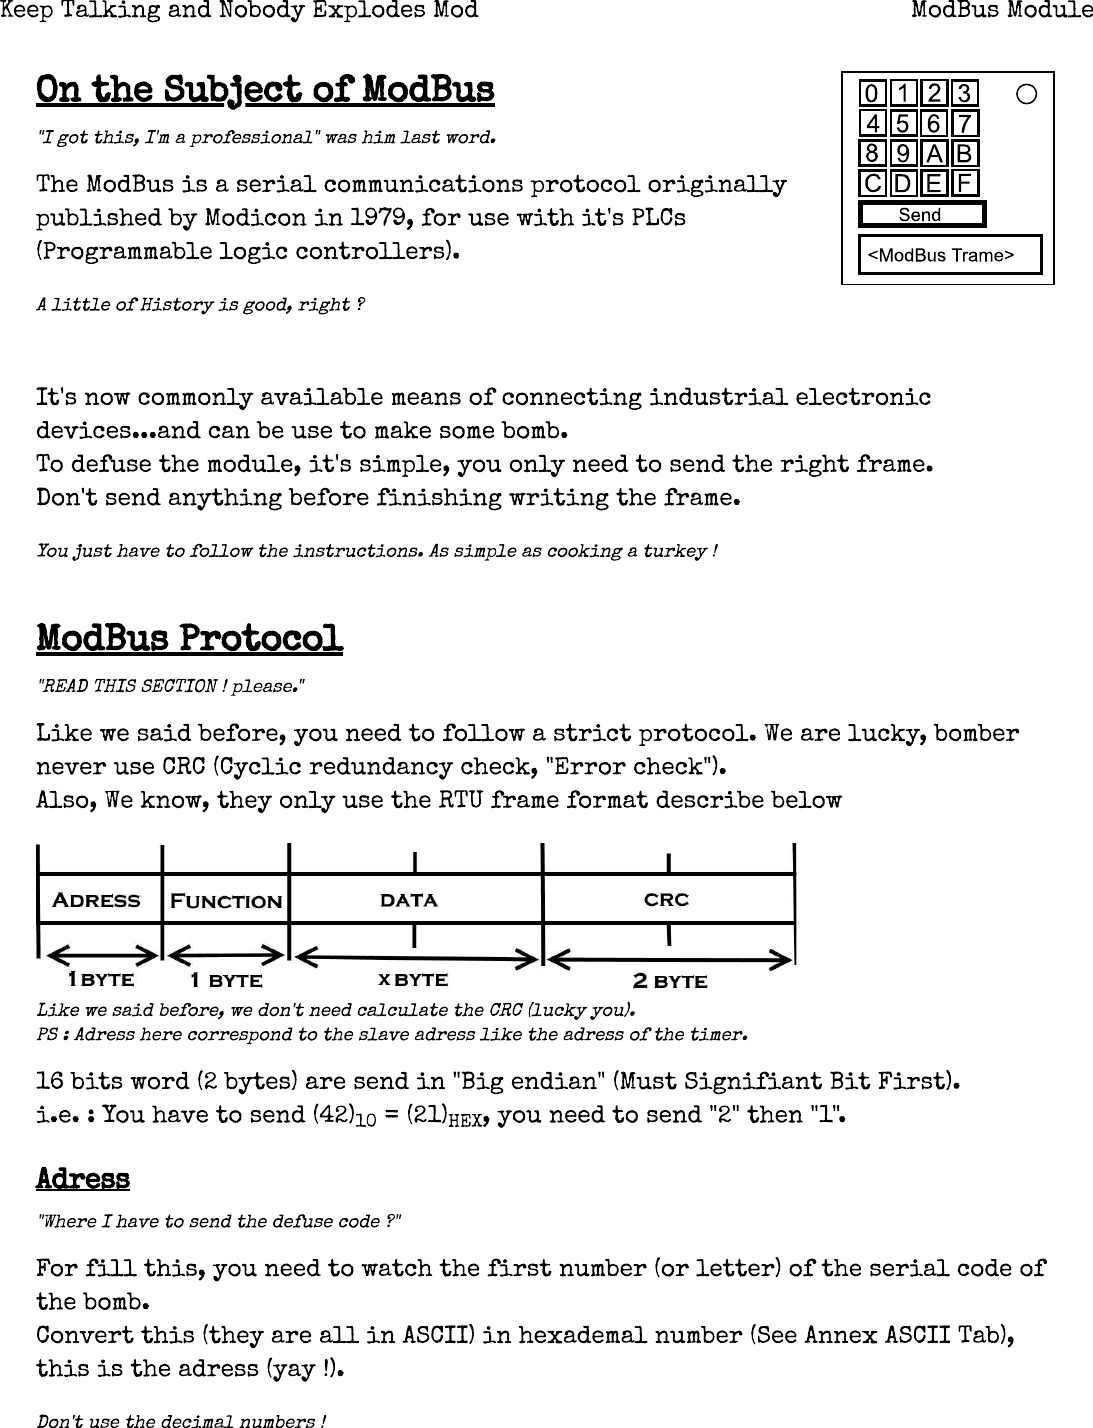 Page 1 of 5 - ModBus Module â•ﬂ Keep Talking And Nobody Explodes Mod Bus Manual PDF V1.0